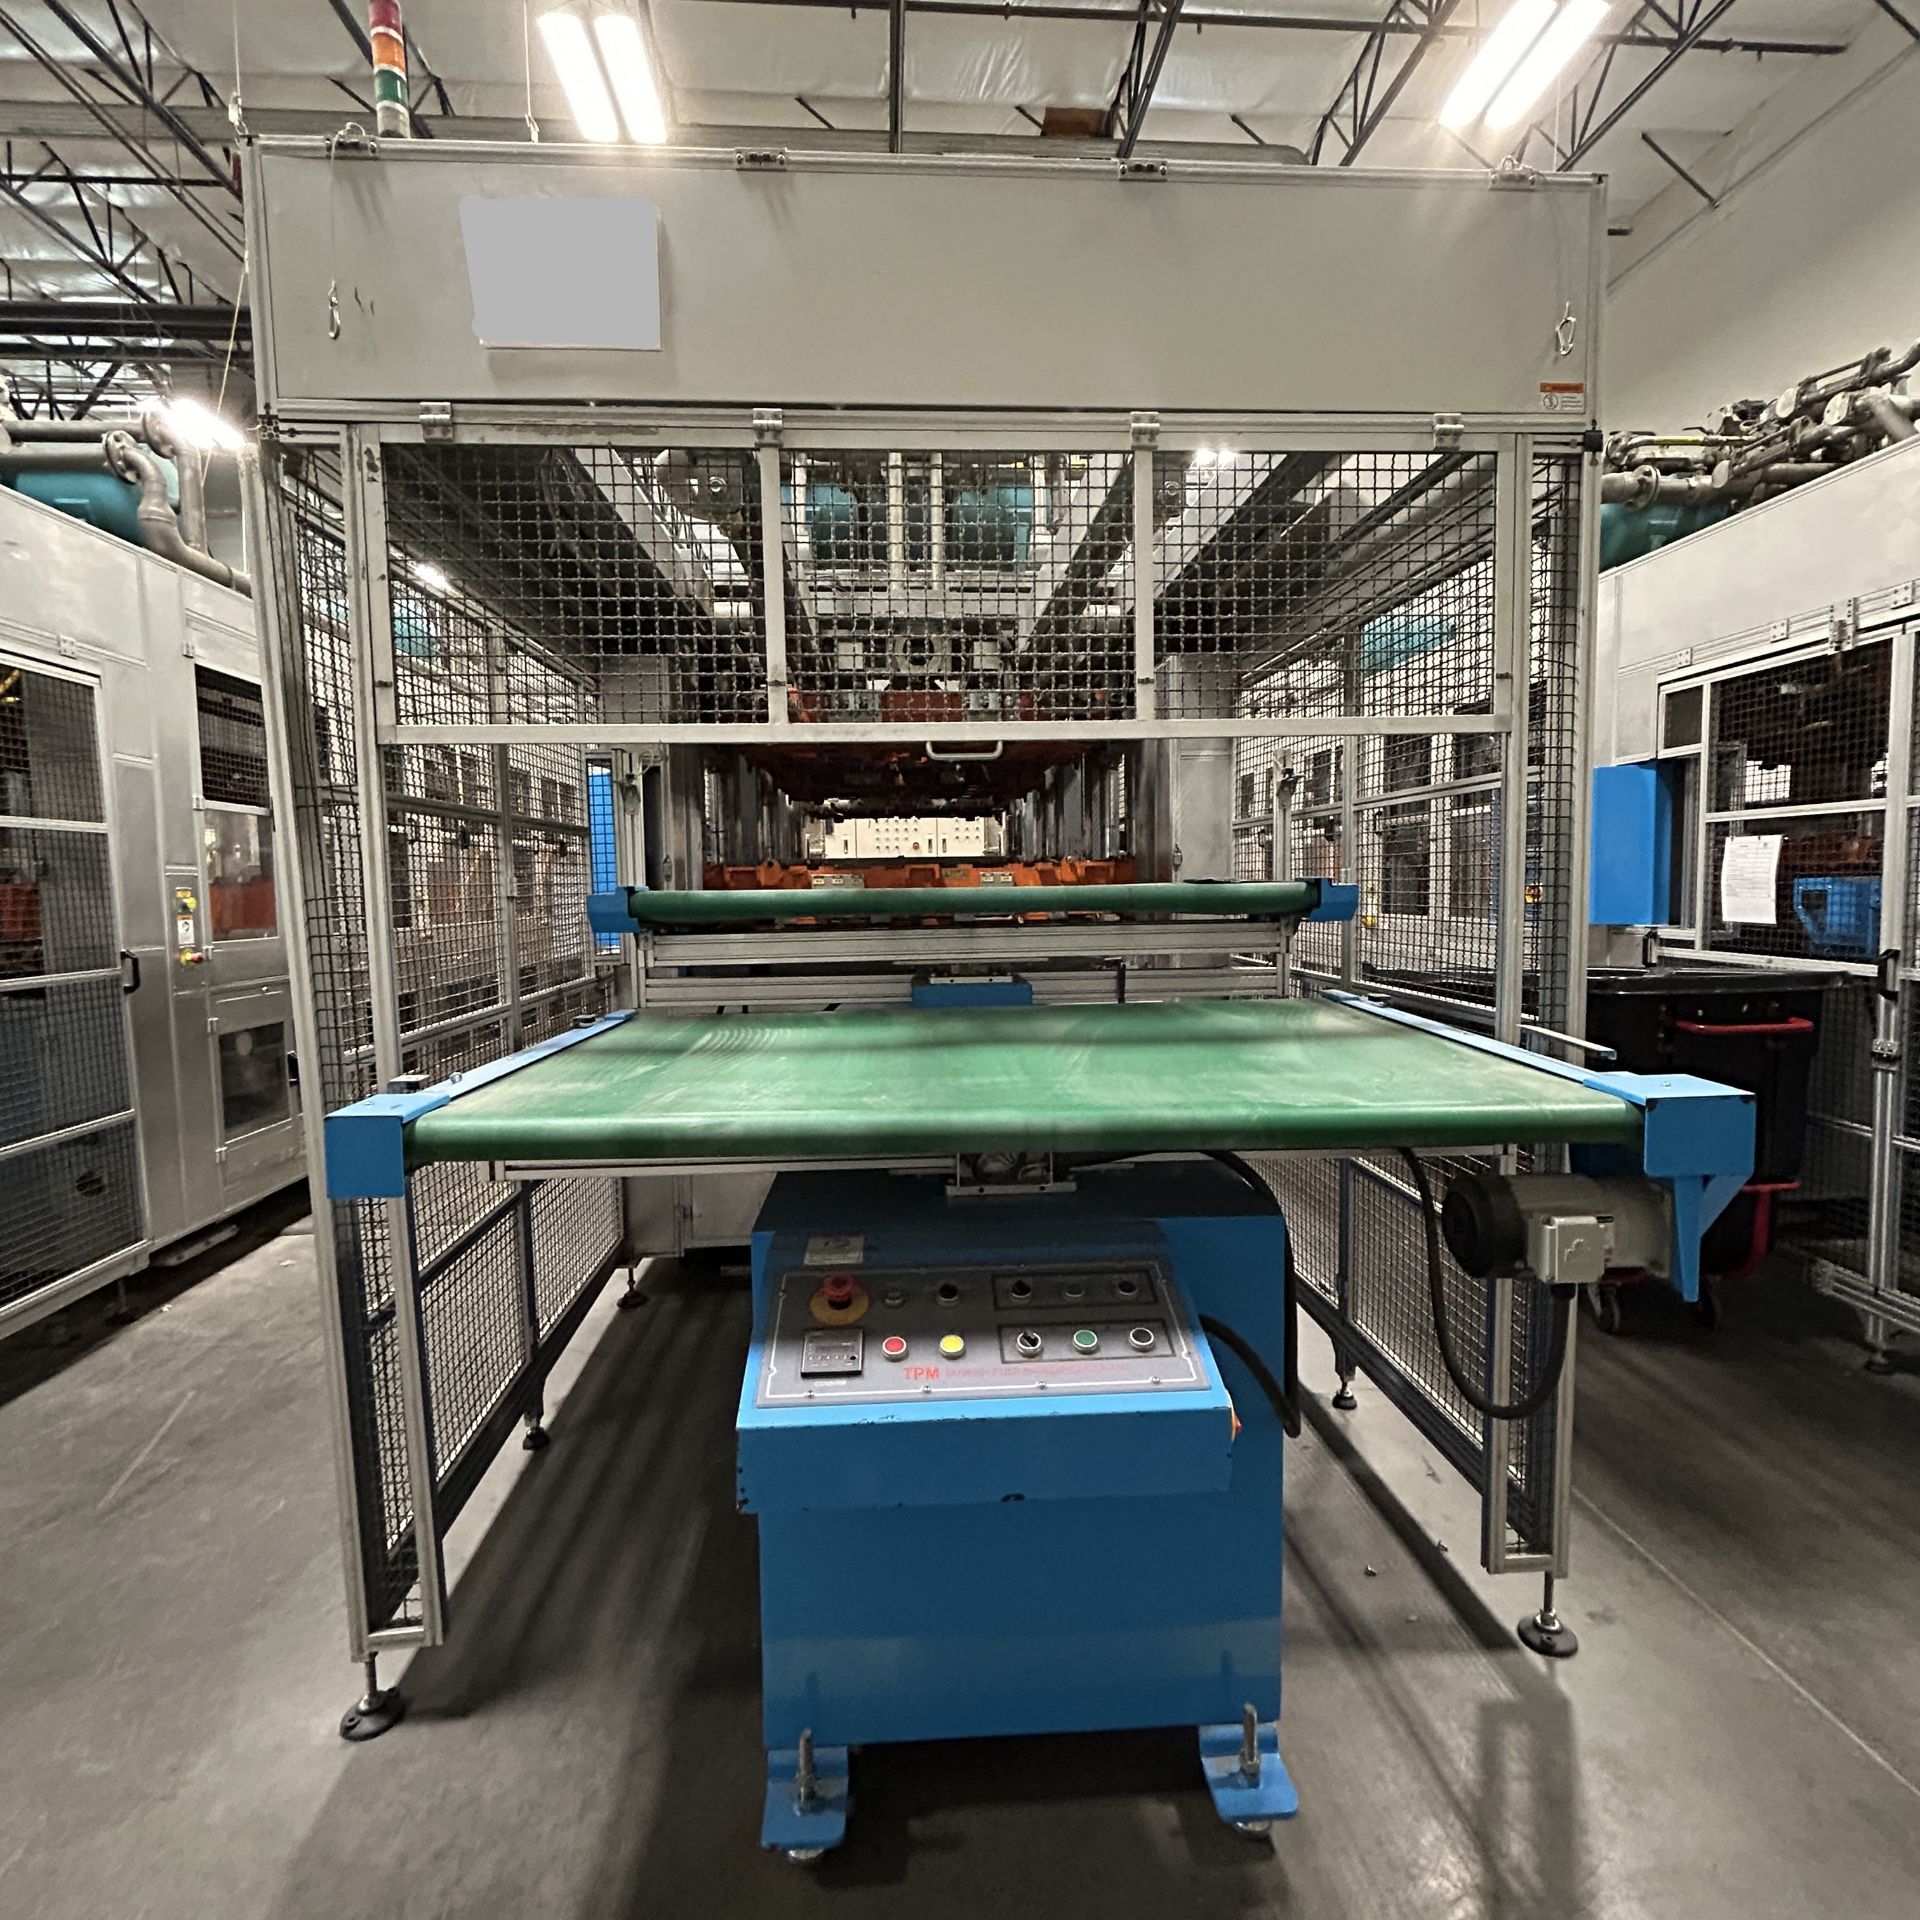 TPM-1500 3-Stage Pulp Thermoforming Machine Equipped With (1) 2018 TPM-AS-1500 2-Stage Auto Stacker - Image 5 of 35